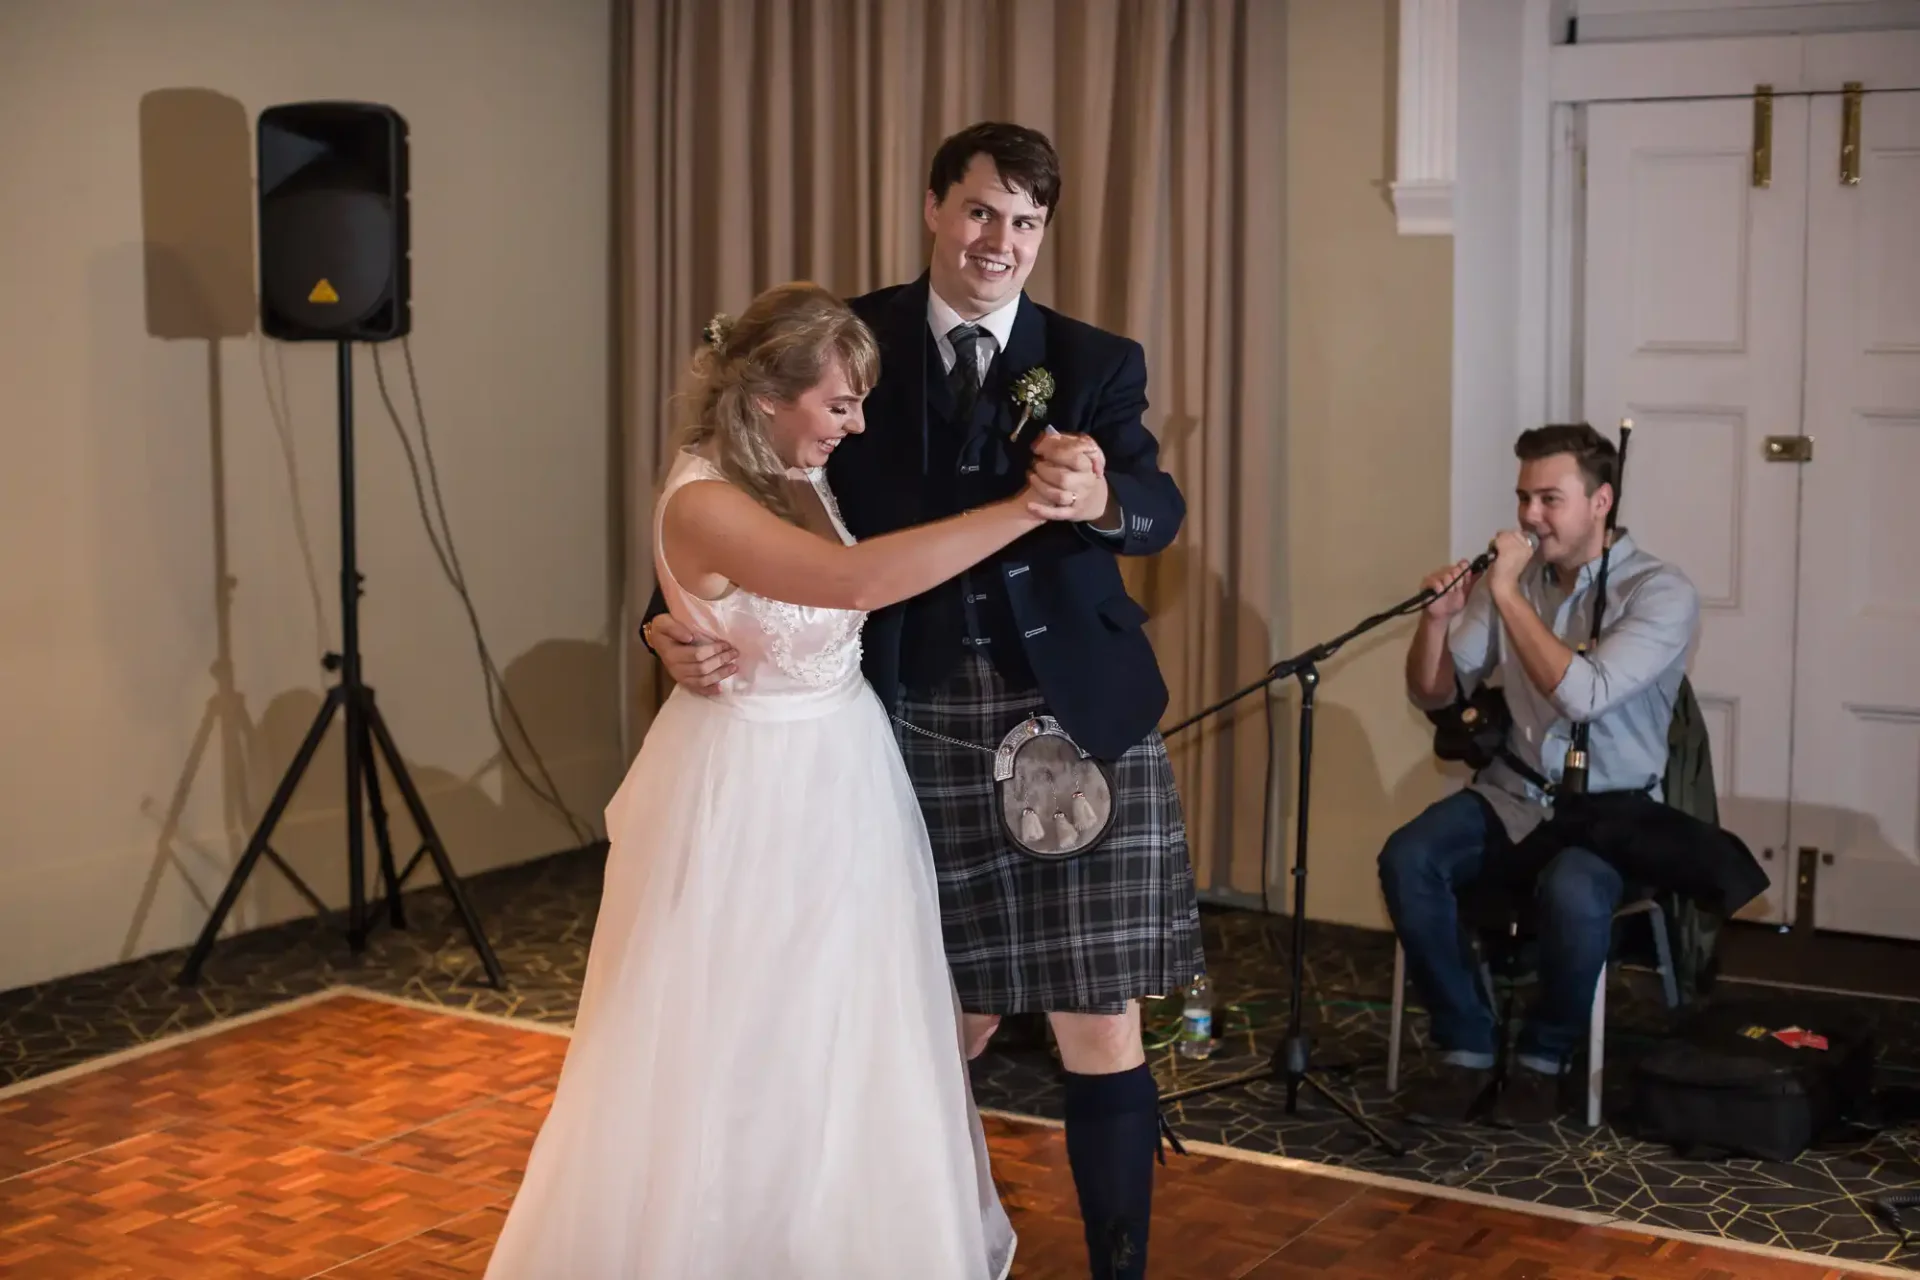 Bride and groom sharing a dance, the groom wearing a kilt, with a musician playing the accordion in the background.